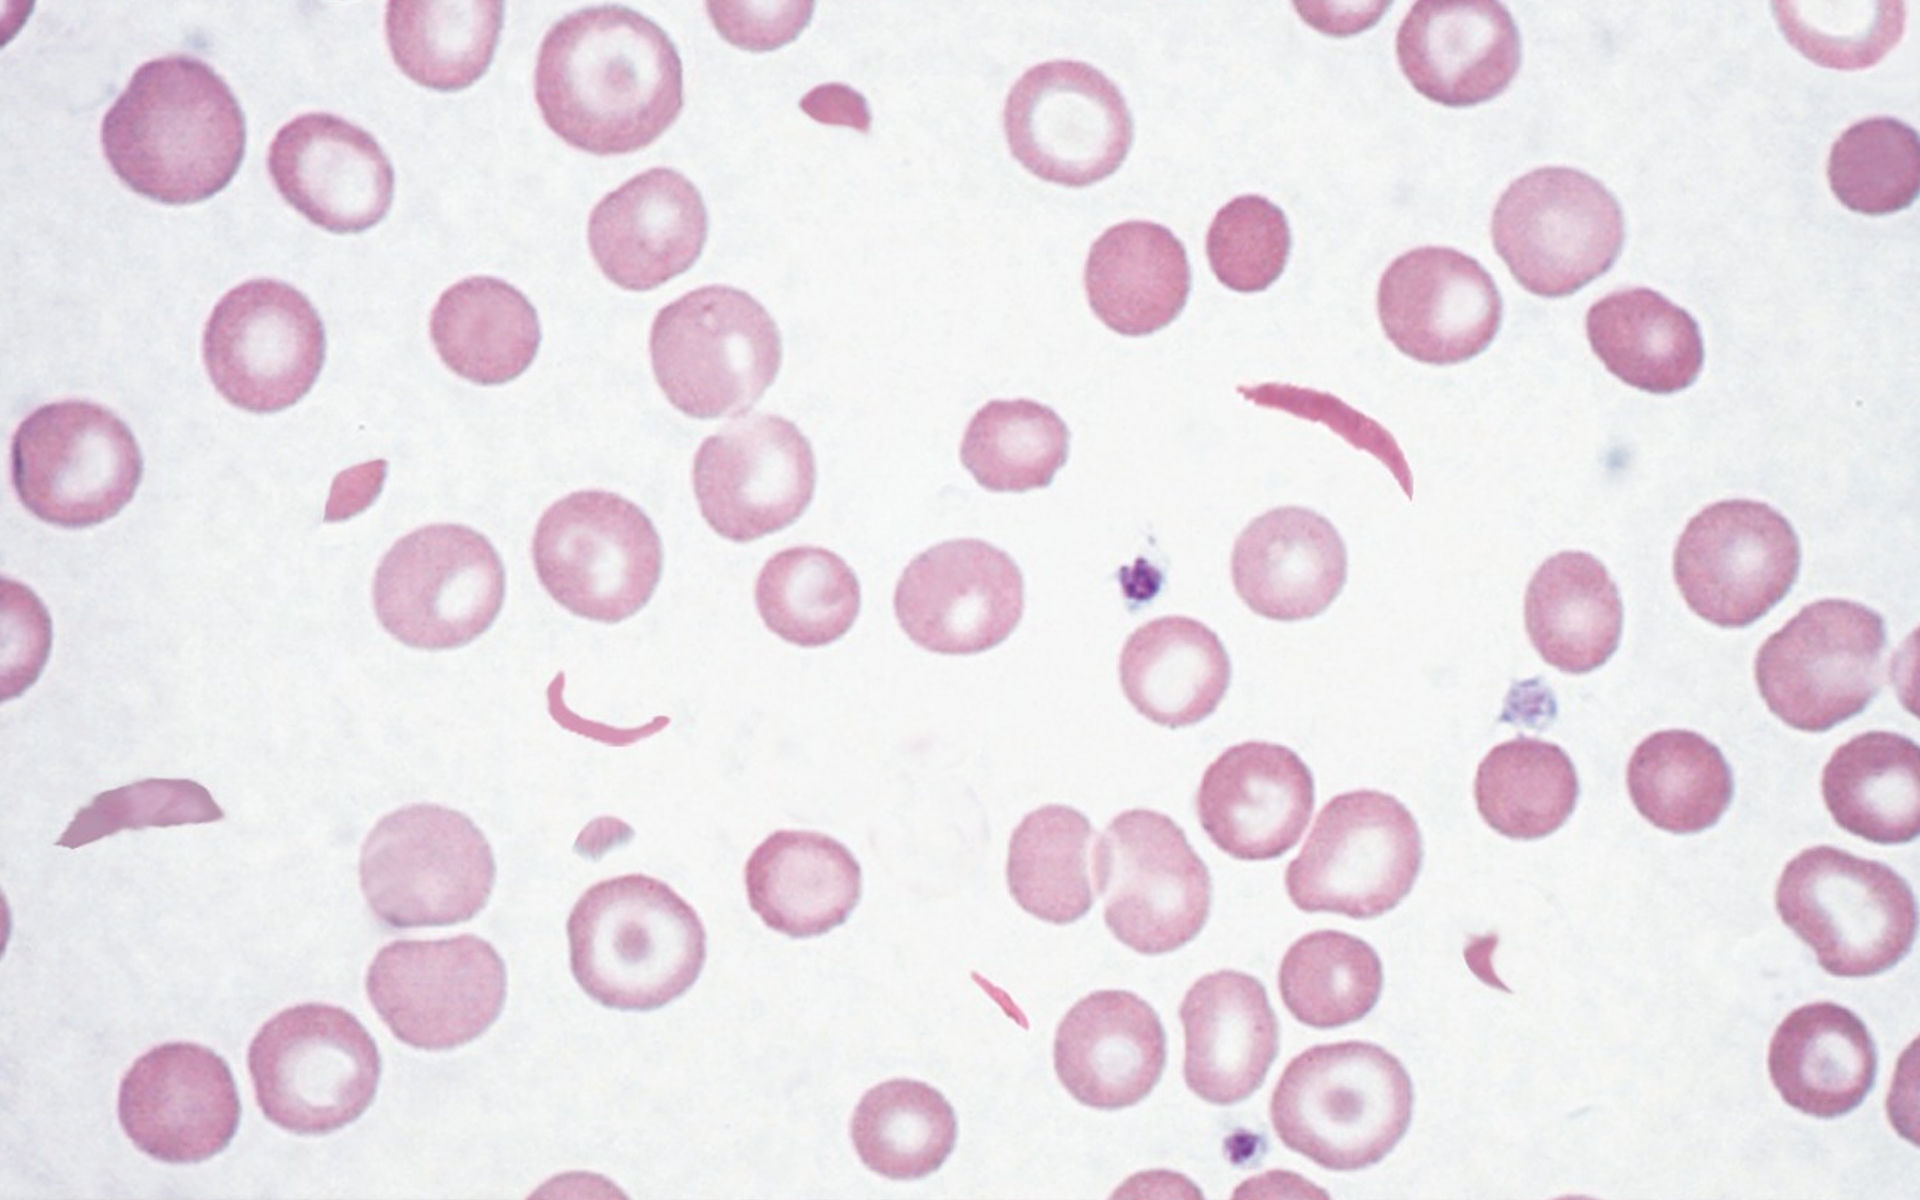 sickle-cell-disease